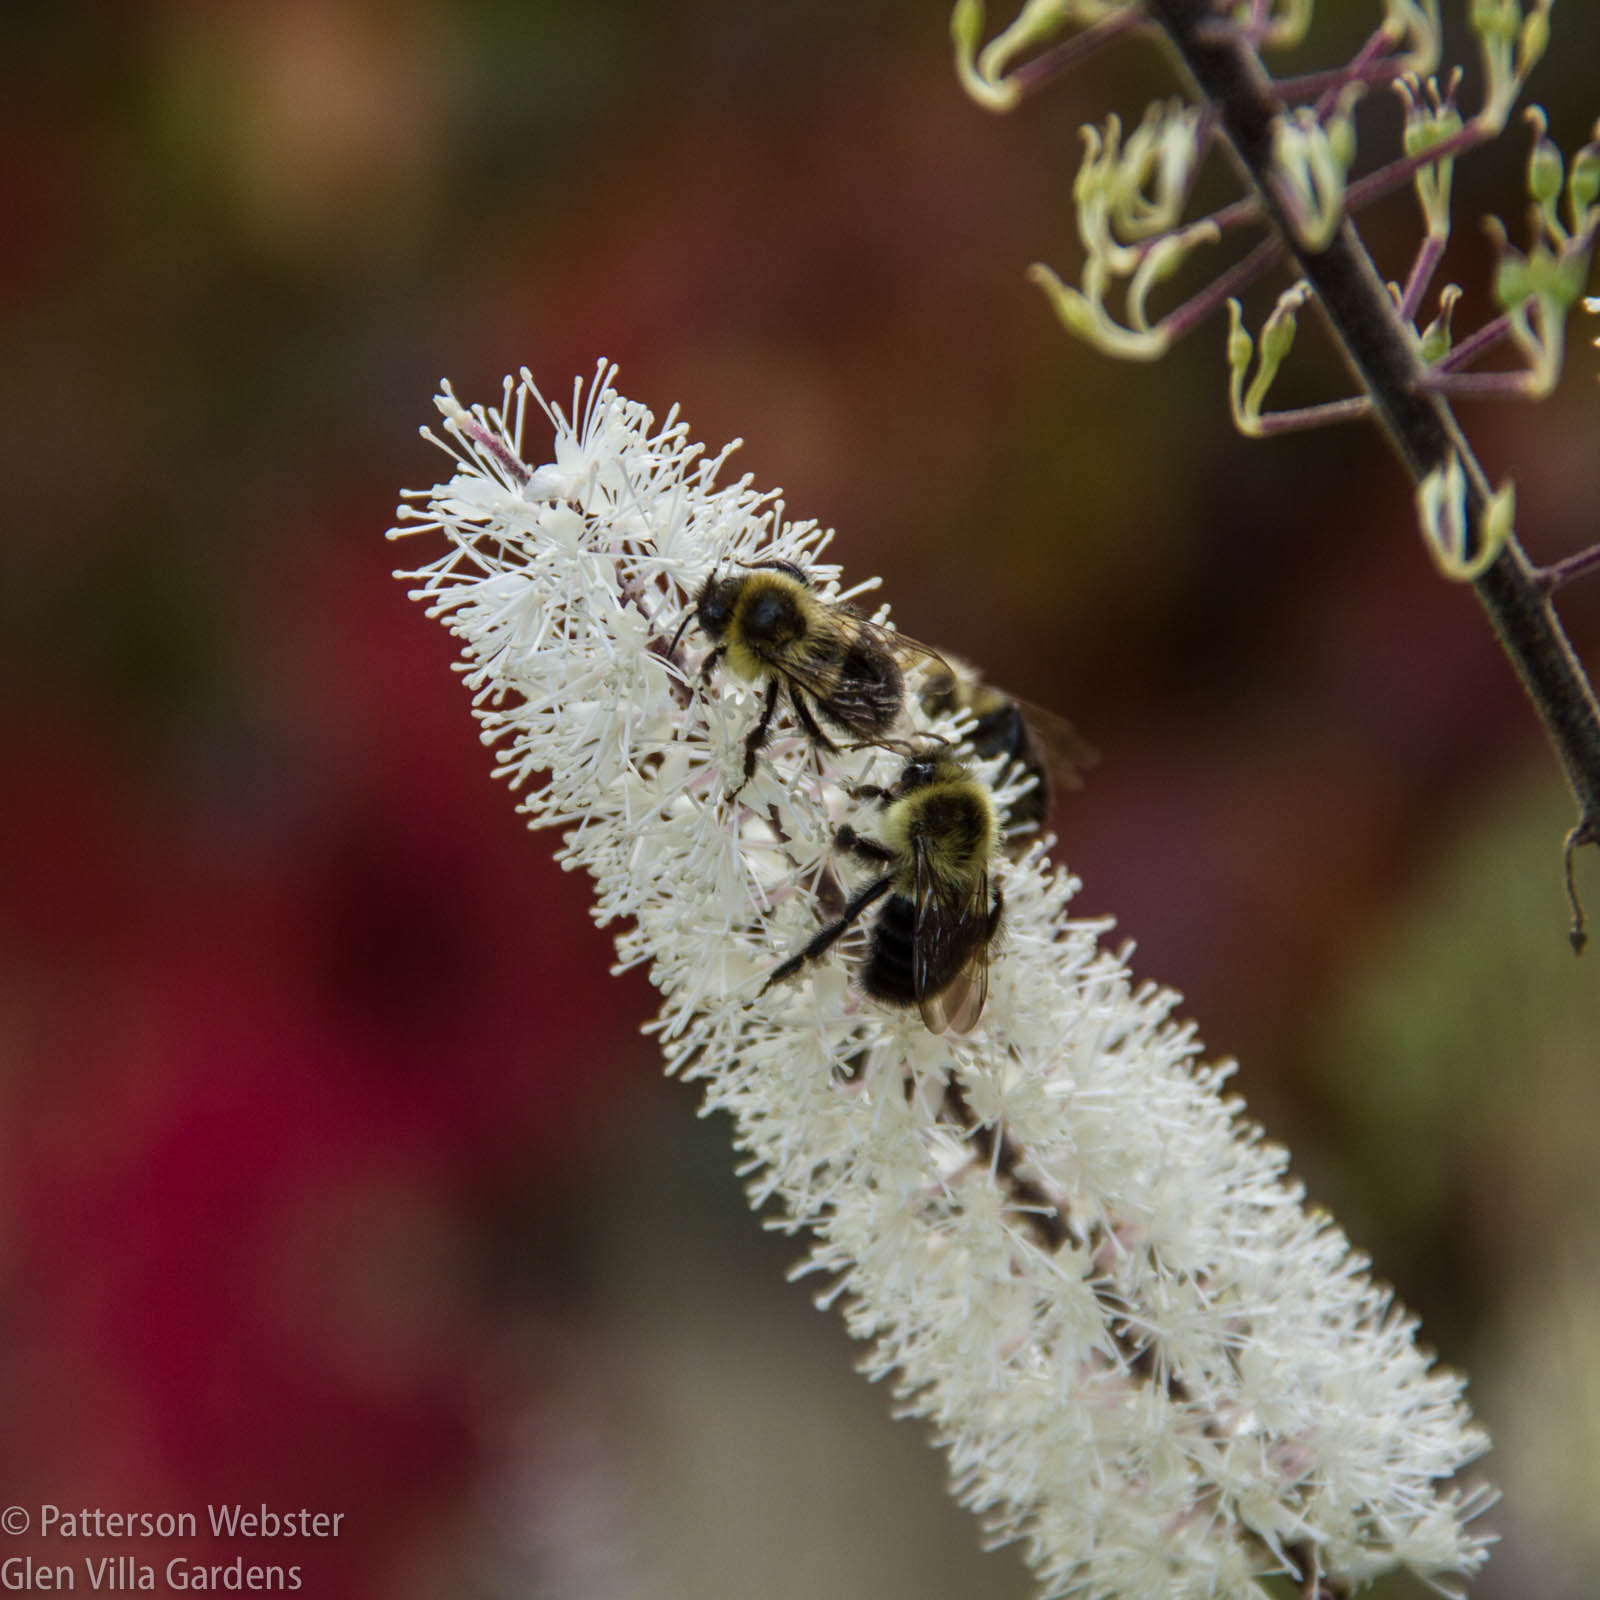 Dozens of bees were fighting for space on the snakeroot... it was fun to watch them crawl into and over each other.